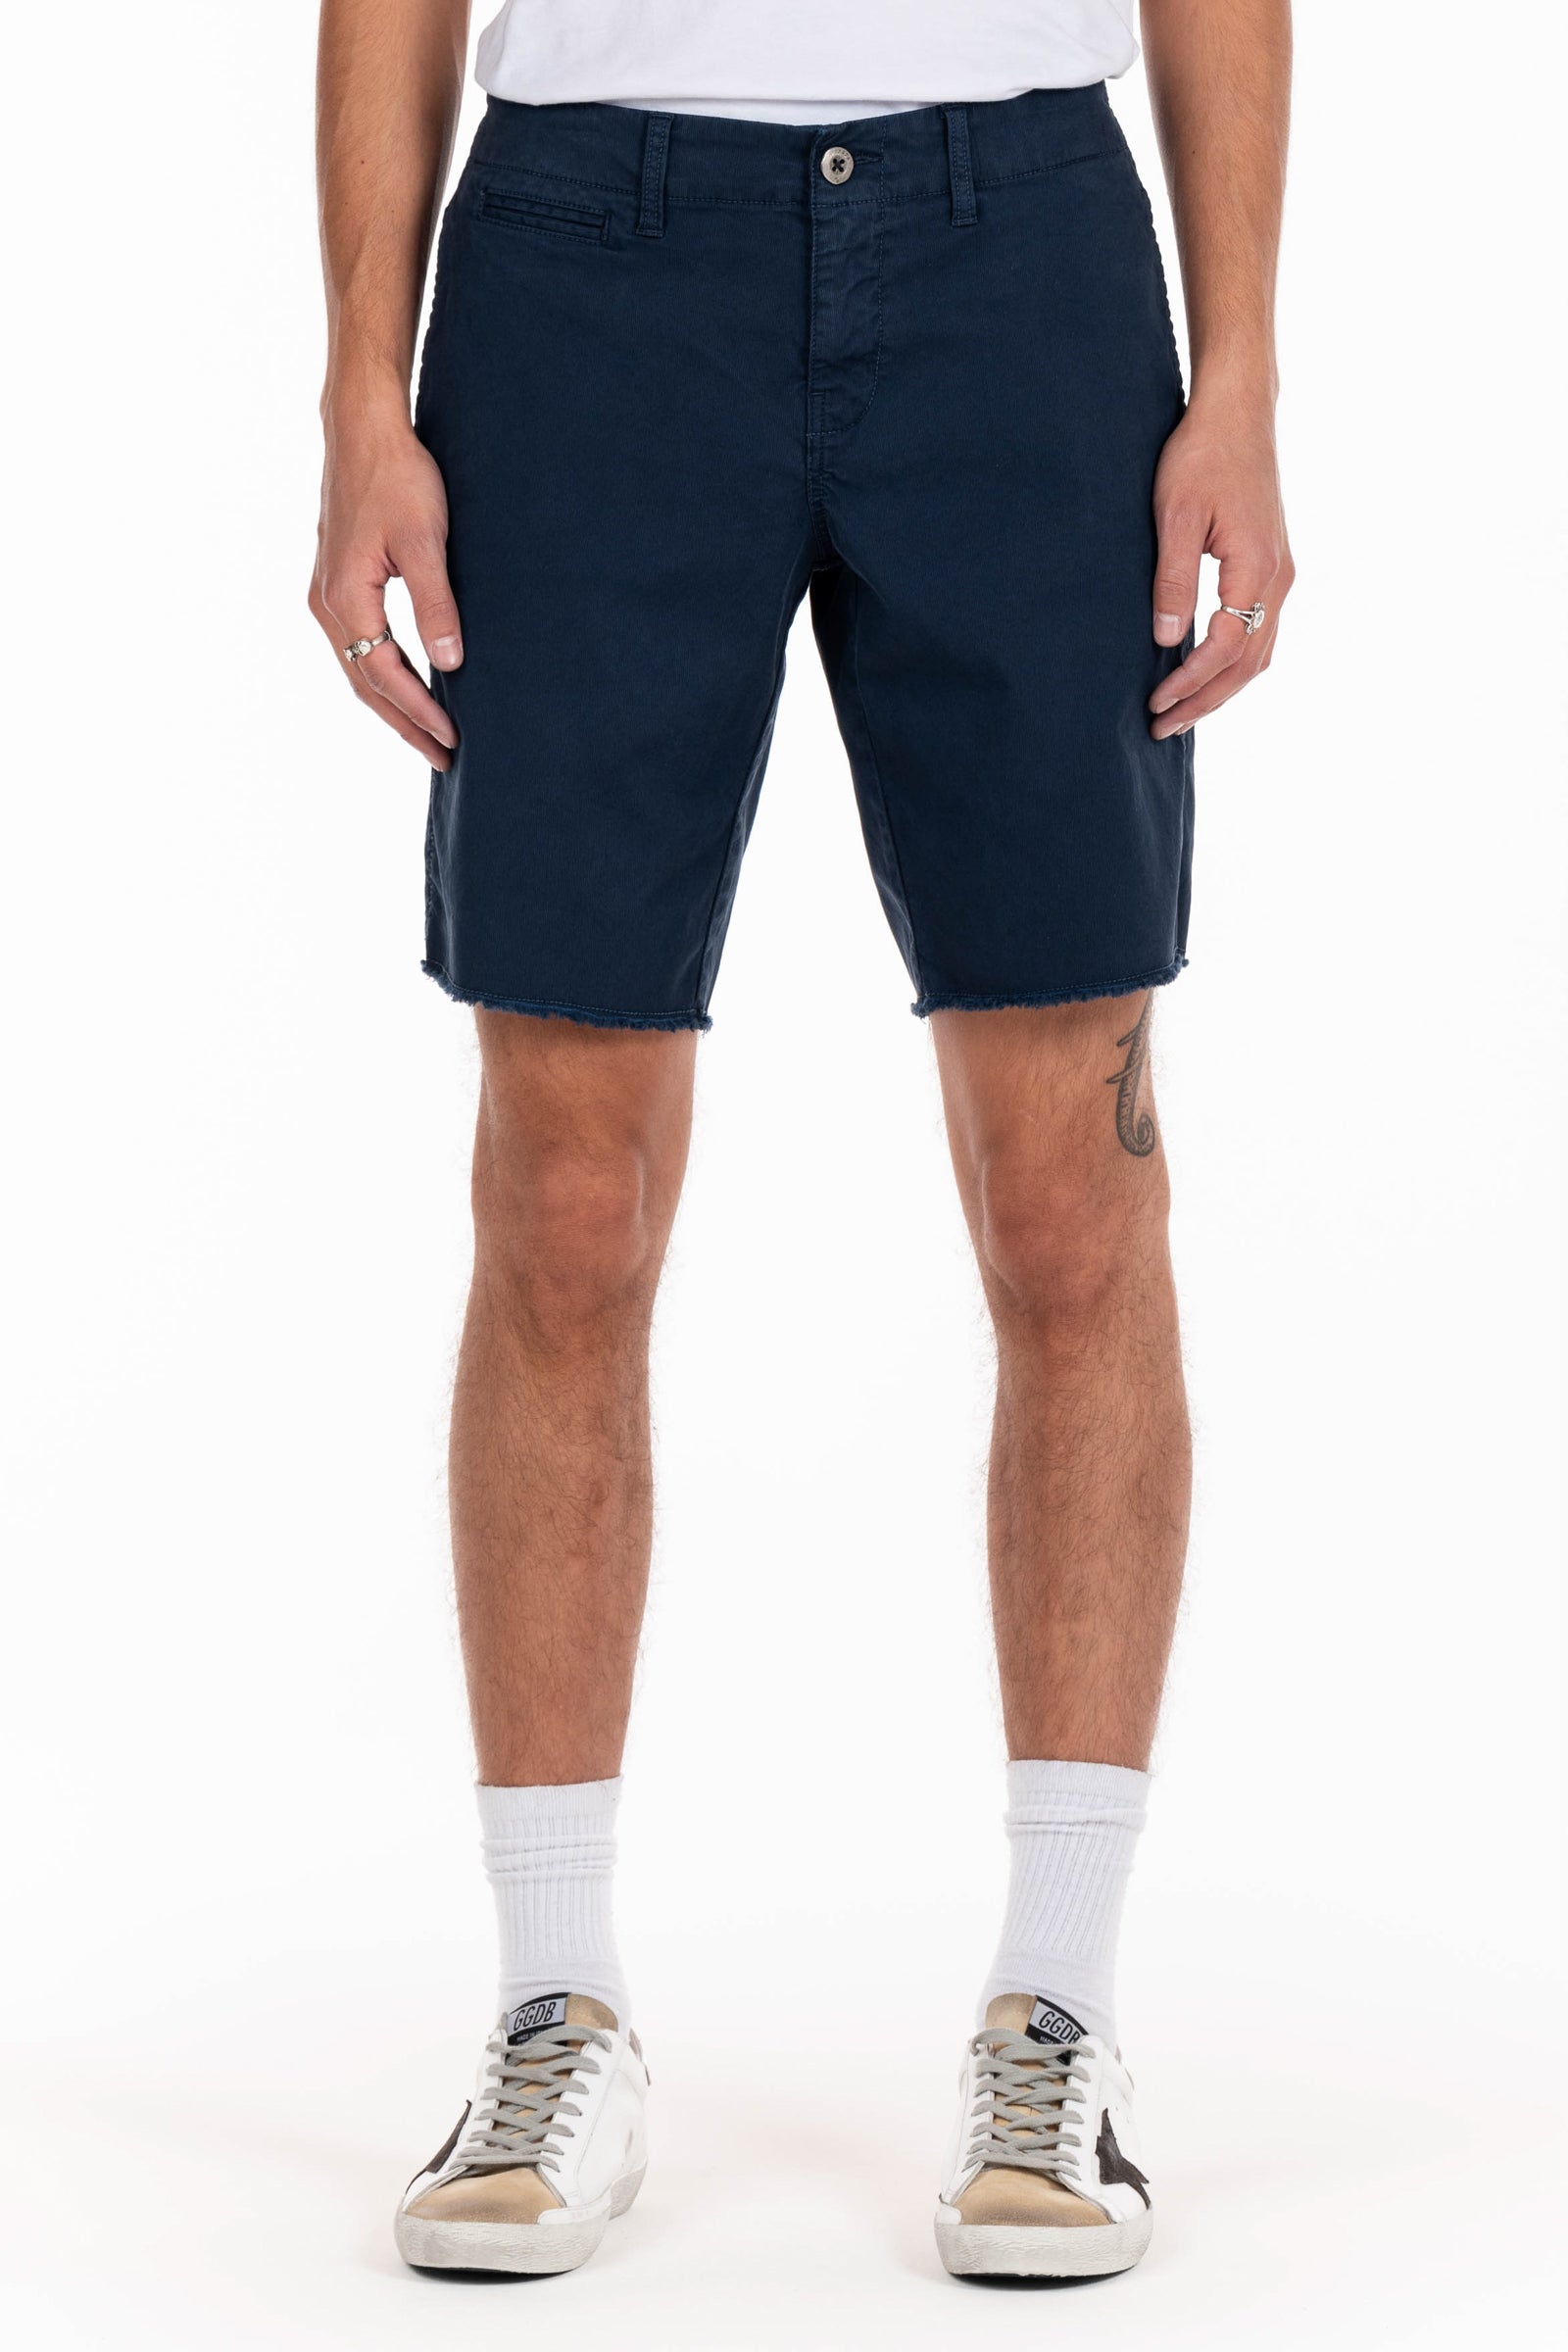 Original Paperbacks Rockland Chino Short in Navy on Model Cropped Front View